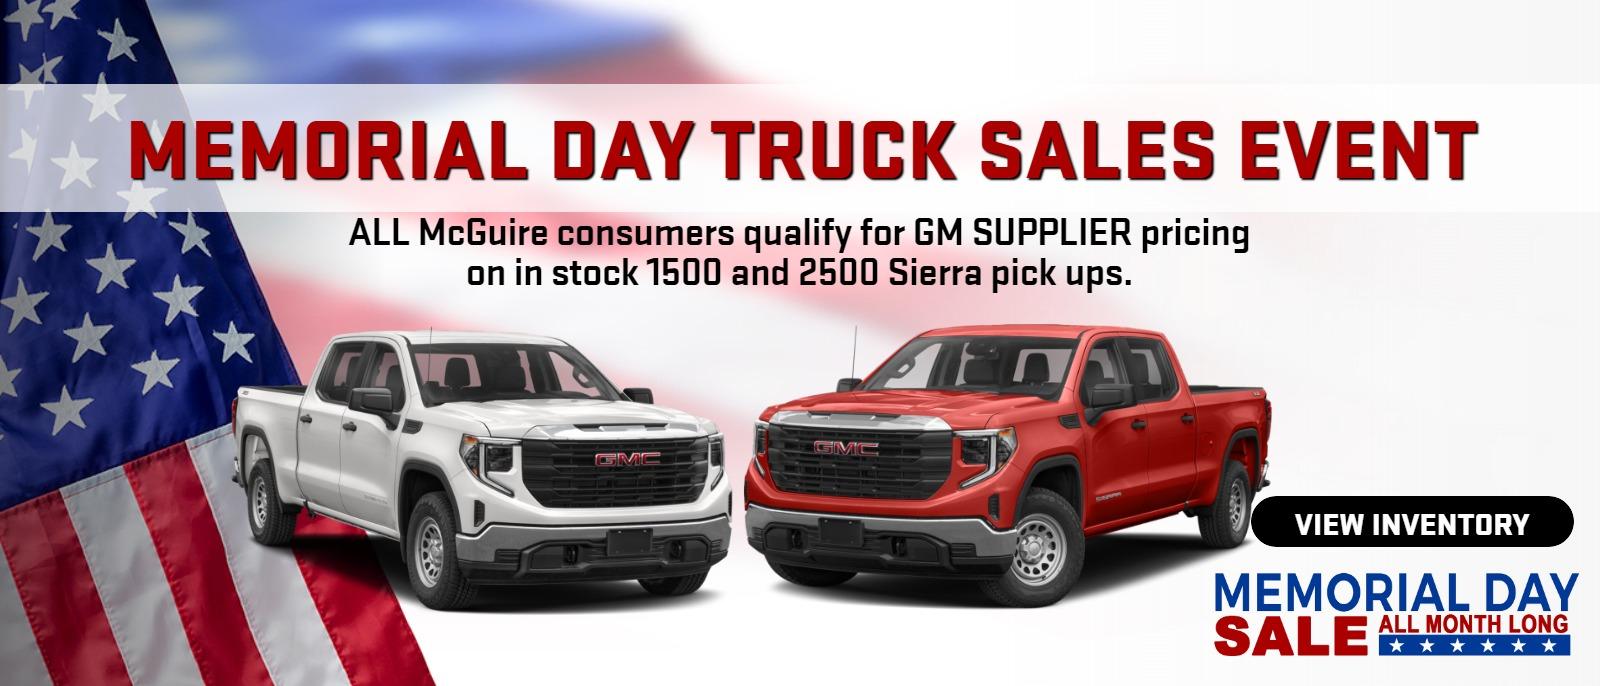 Memorial Day TRUCK SALES EVENT

ALL consumers qualify for GM SUPPLIER pricing
on in stock 1500 and 2500 Sierra pick ups.